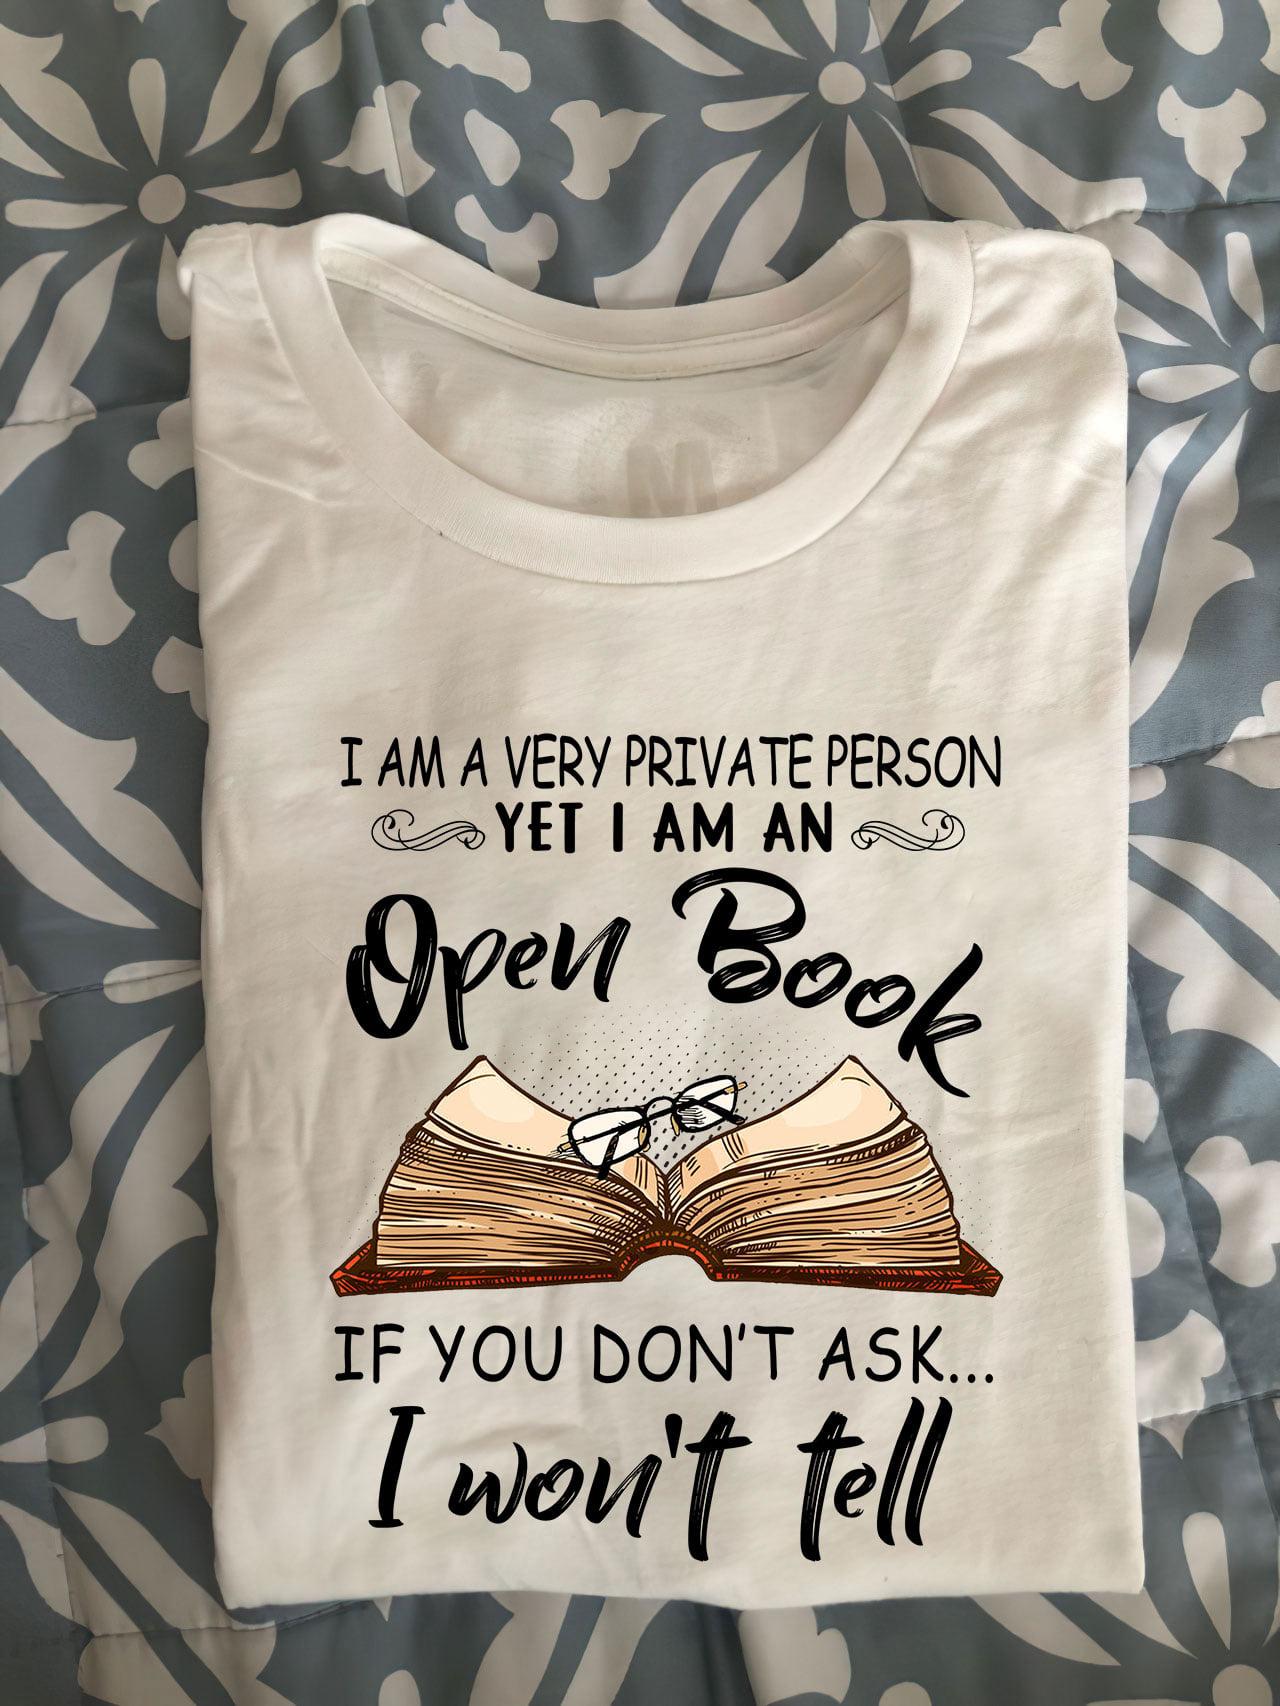 I am a very private person yet I am an open book if you don't ask I won't tell - Gift for bookaholic, reading book the habit